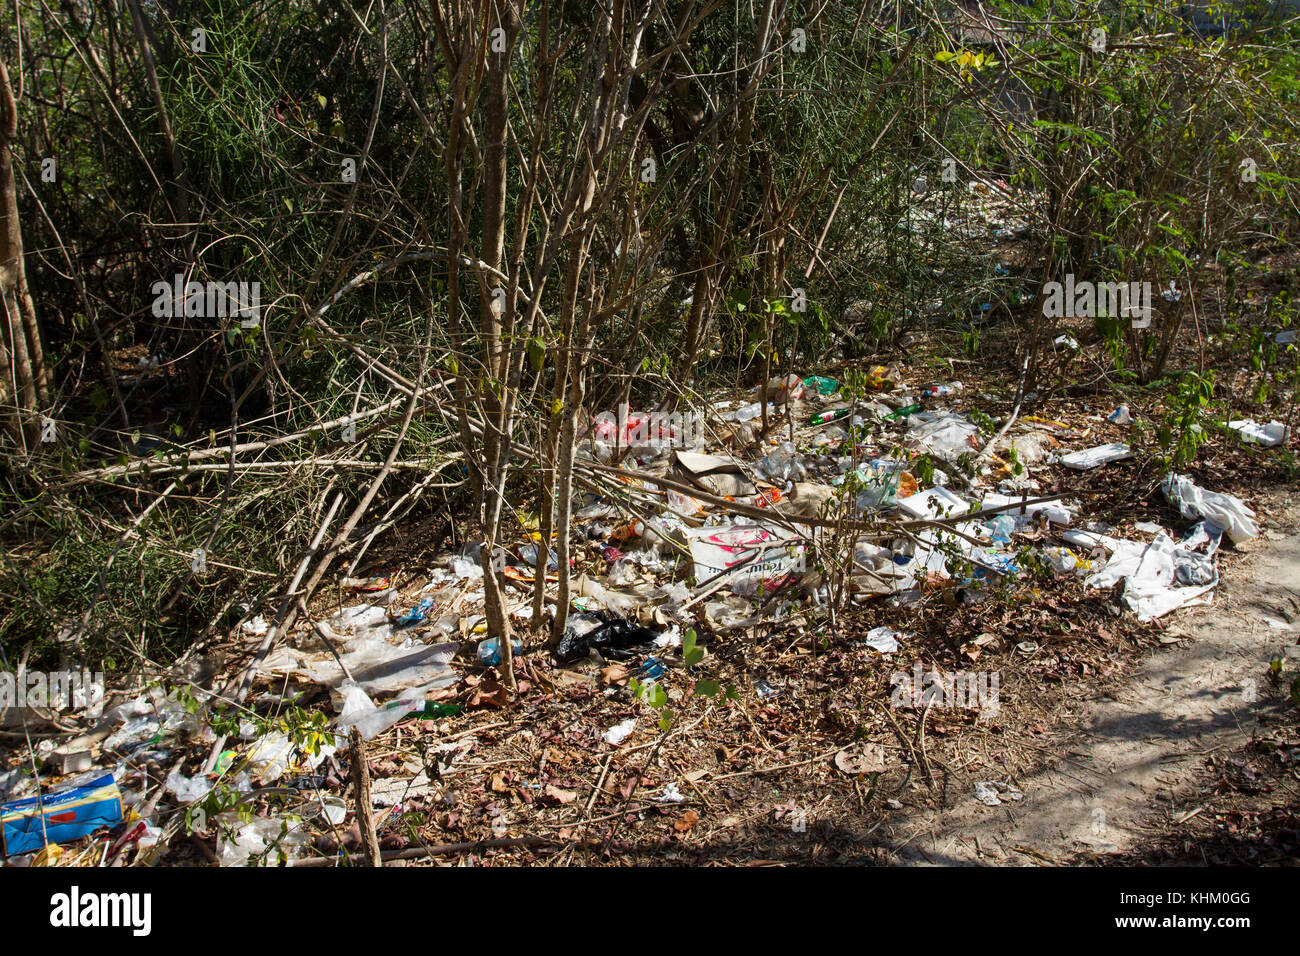 Garbage washed by the sea in bushes, environmental pollution, Nusa Lembongan, Small Sunda Islands, Indonesia Stock Photo